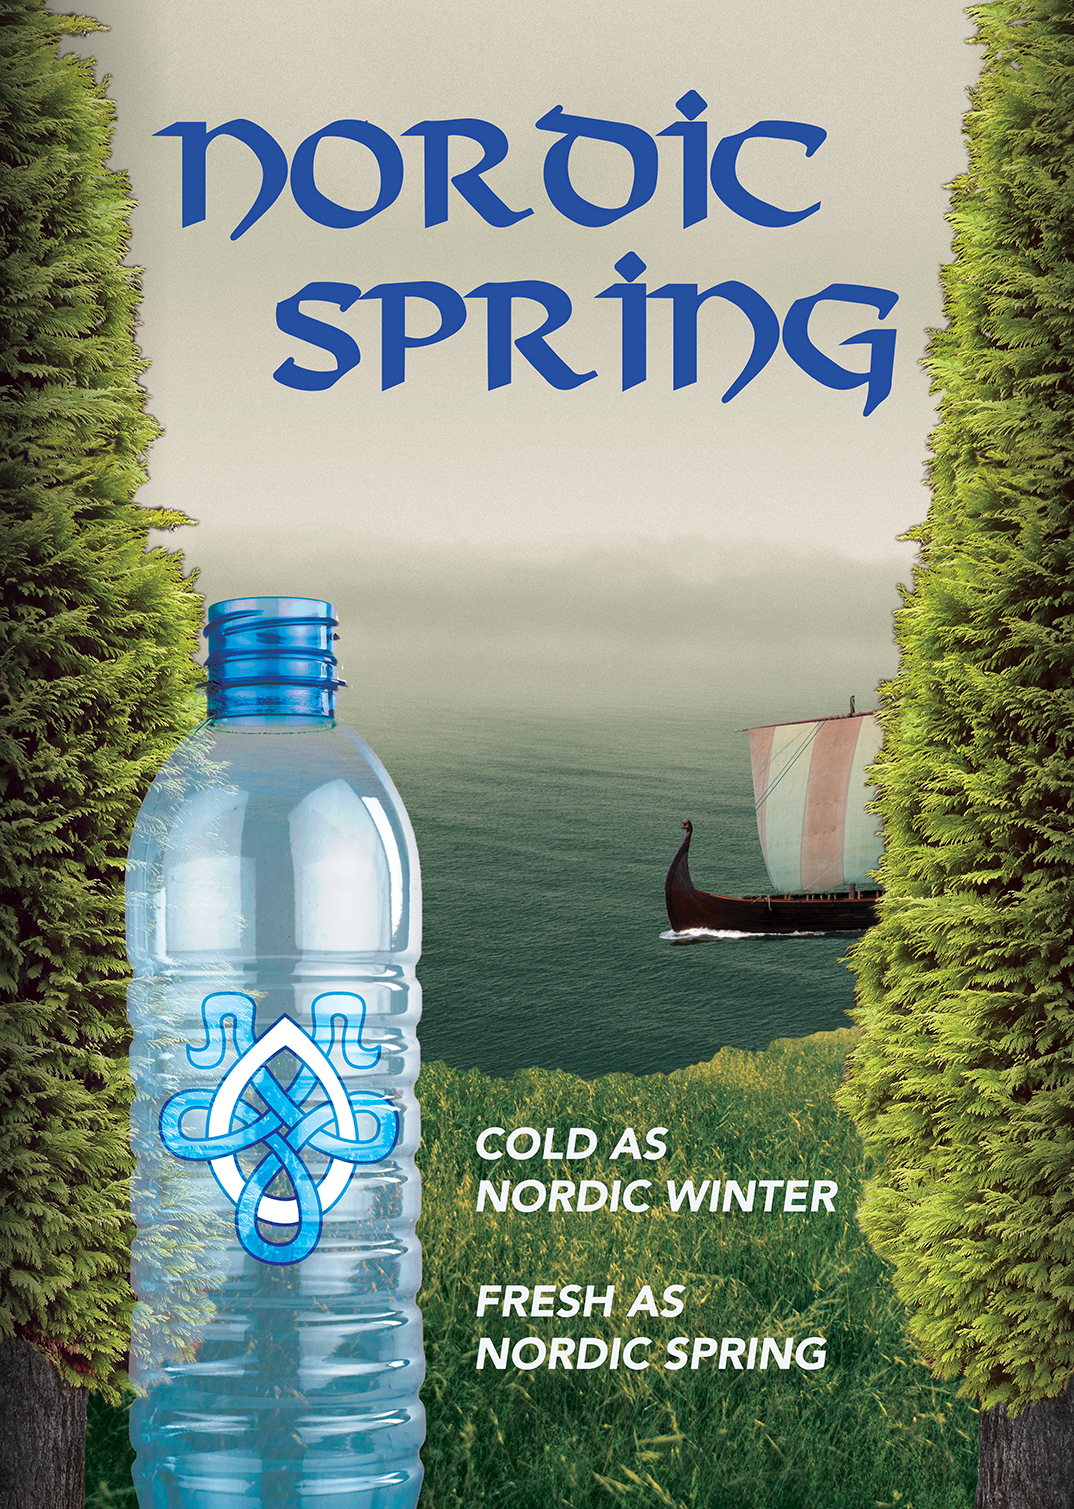 A poster for a water brand showing a bottle in the foreground with a viking longboat sailing on the sea in the background.